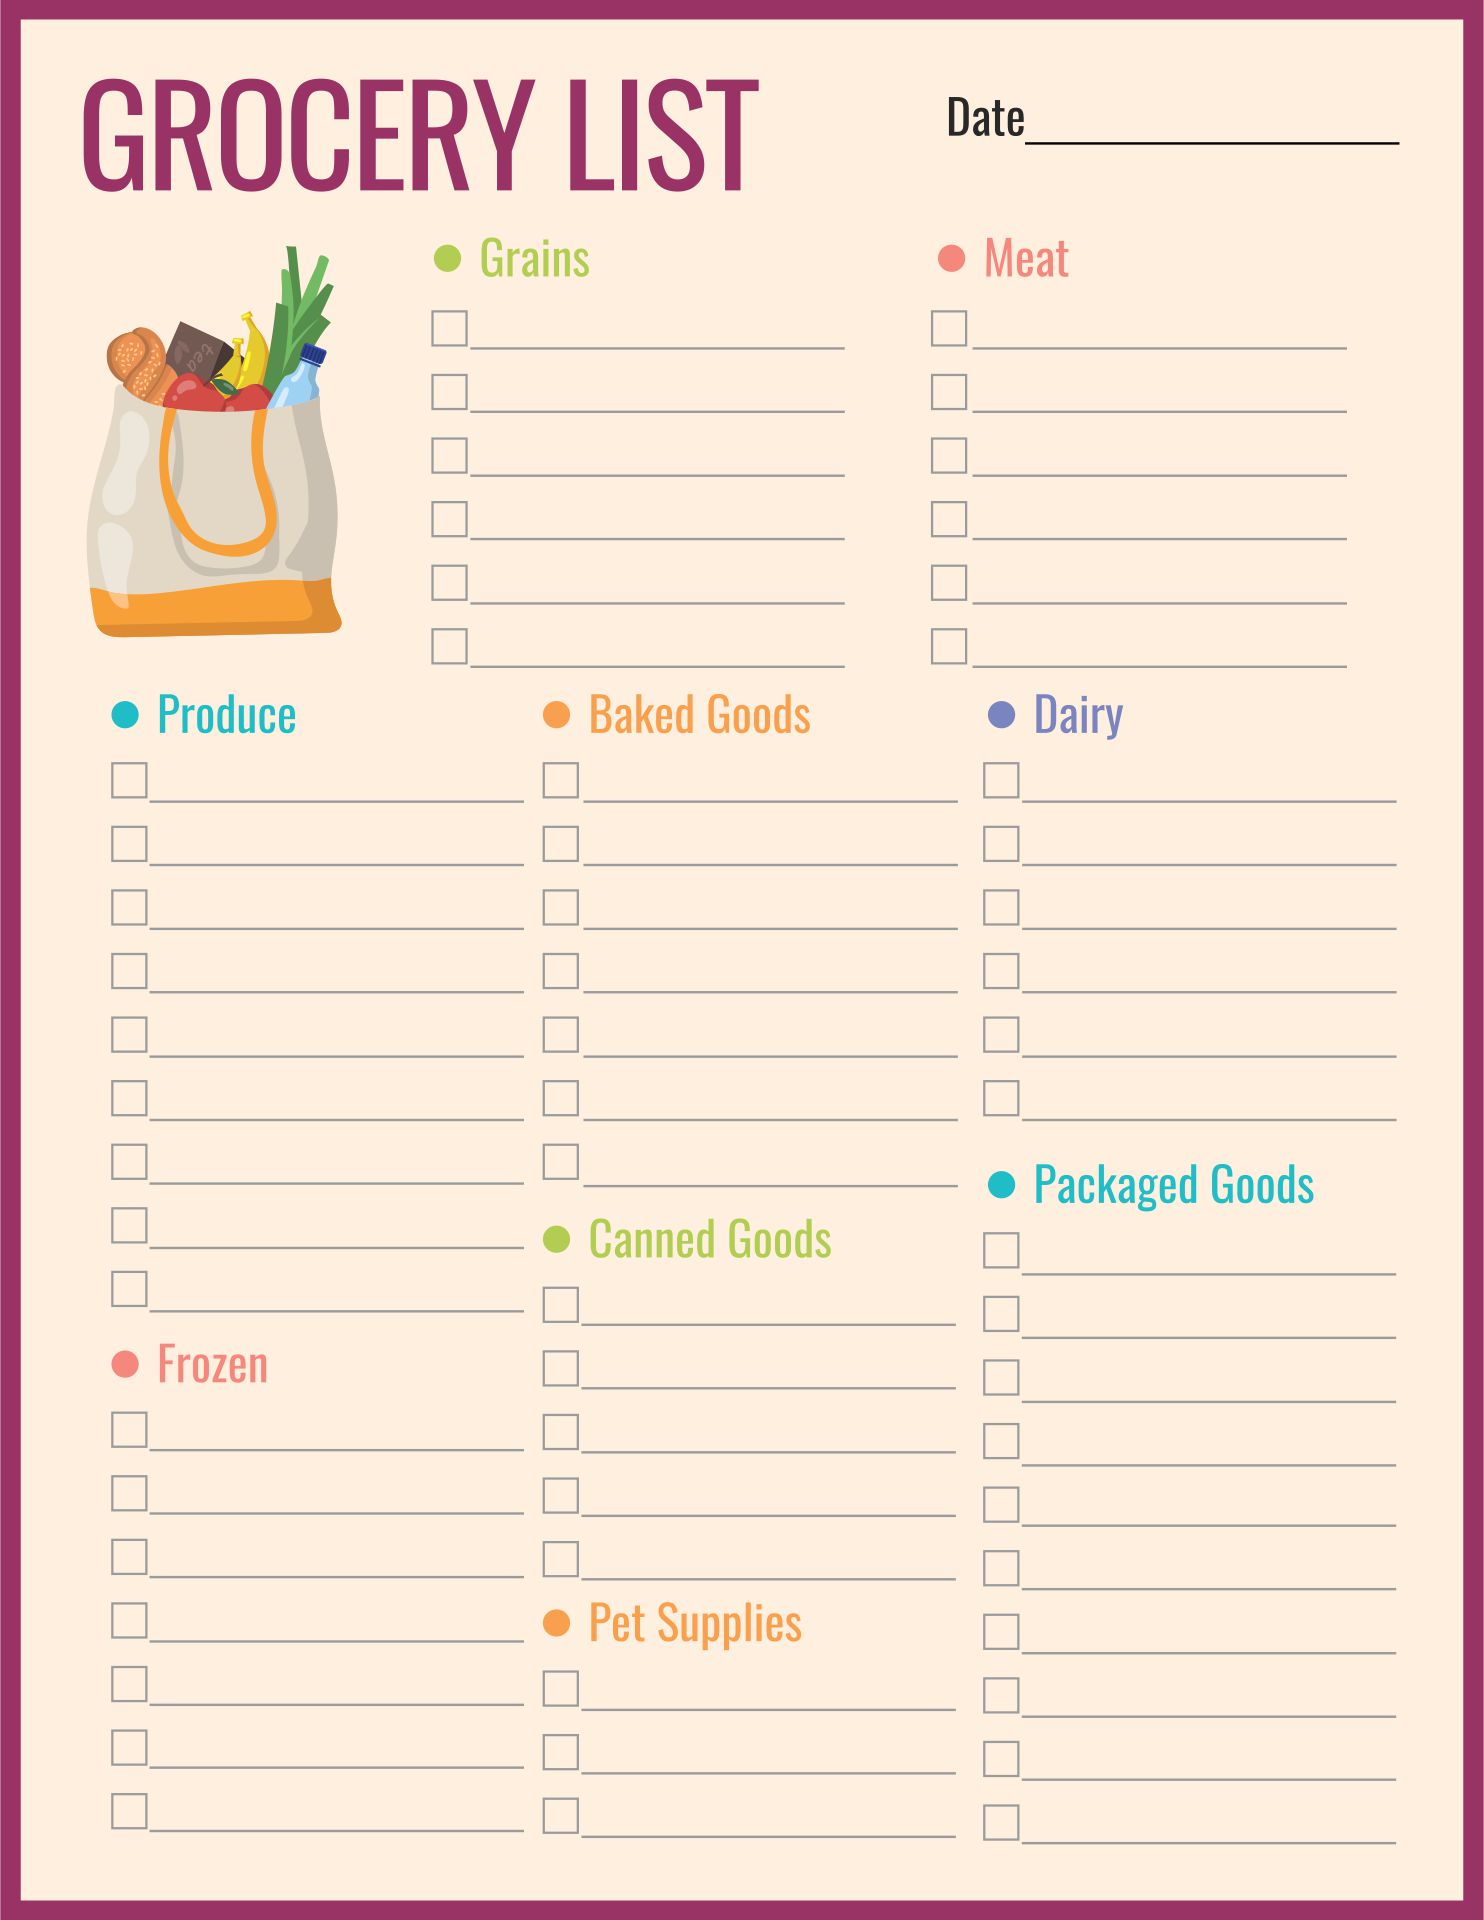 6-free-shopping-list-templates-excel-pdf-formats-shopping-list-grocery-grocery-list-template